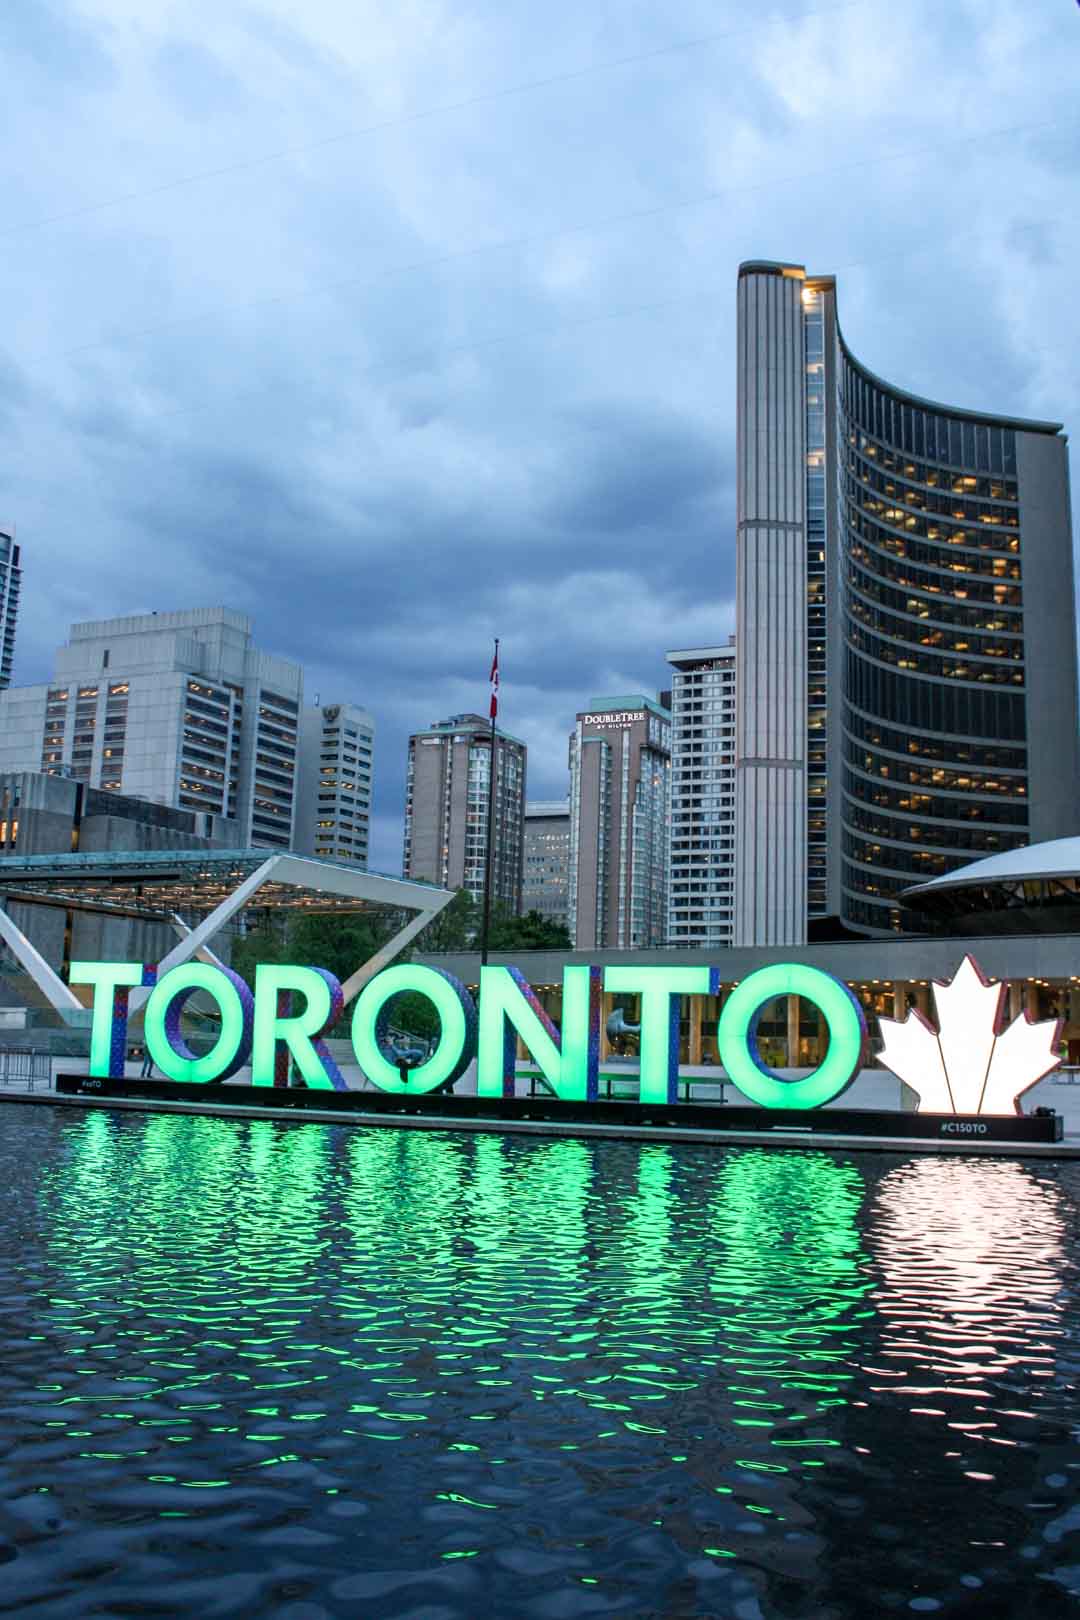 3-D Toronto Sign illuminated in green with Maple Leaf sign illuminated in white as dark clouds fill sky above Toronto skyline